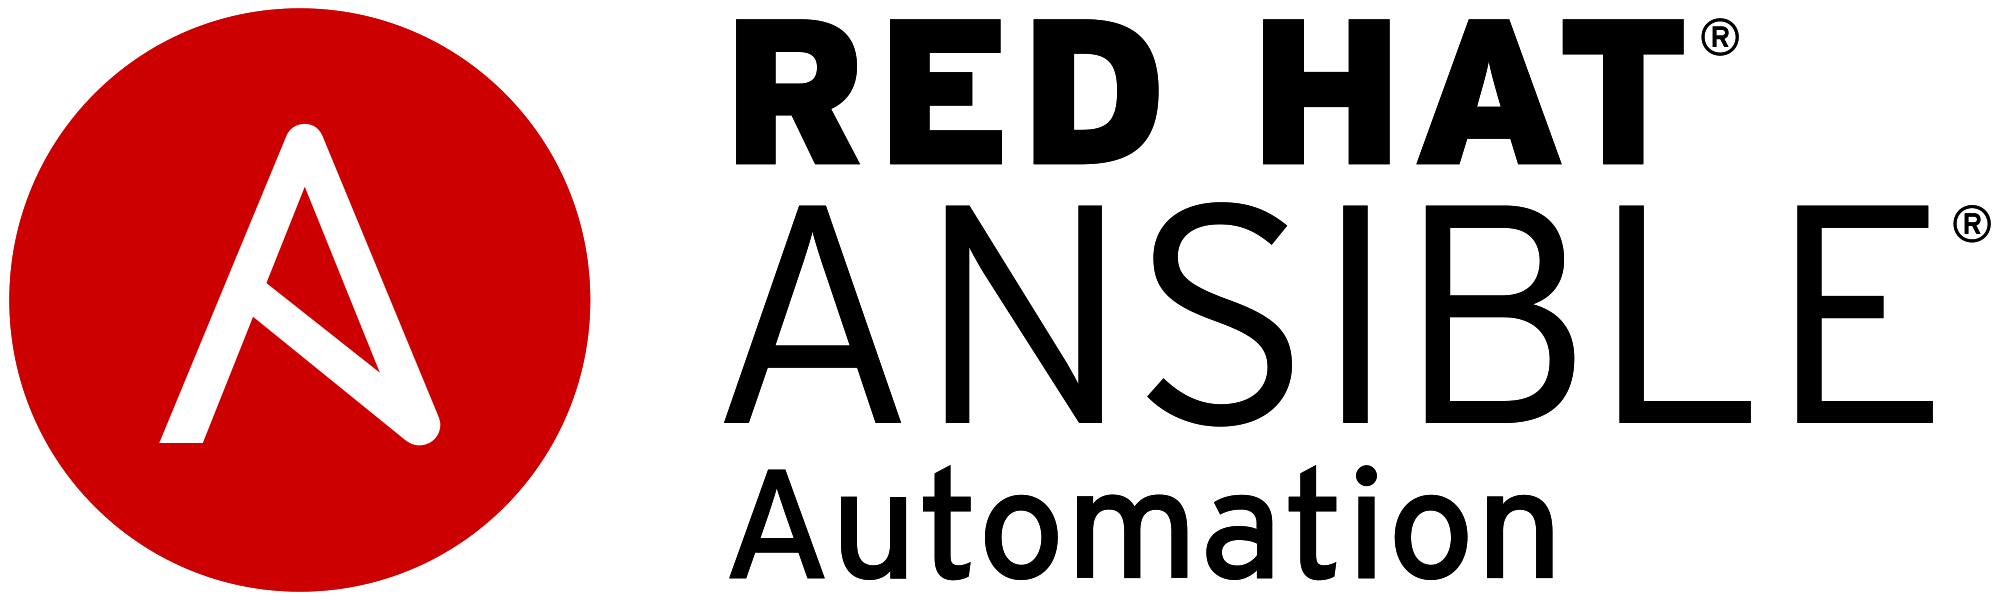 Ansible Logo - Red Hat Ansible Automation Field Day